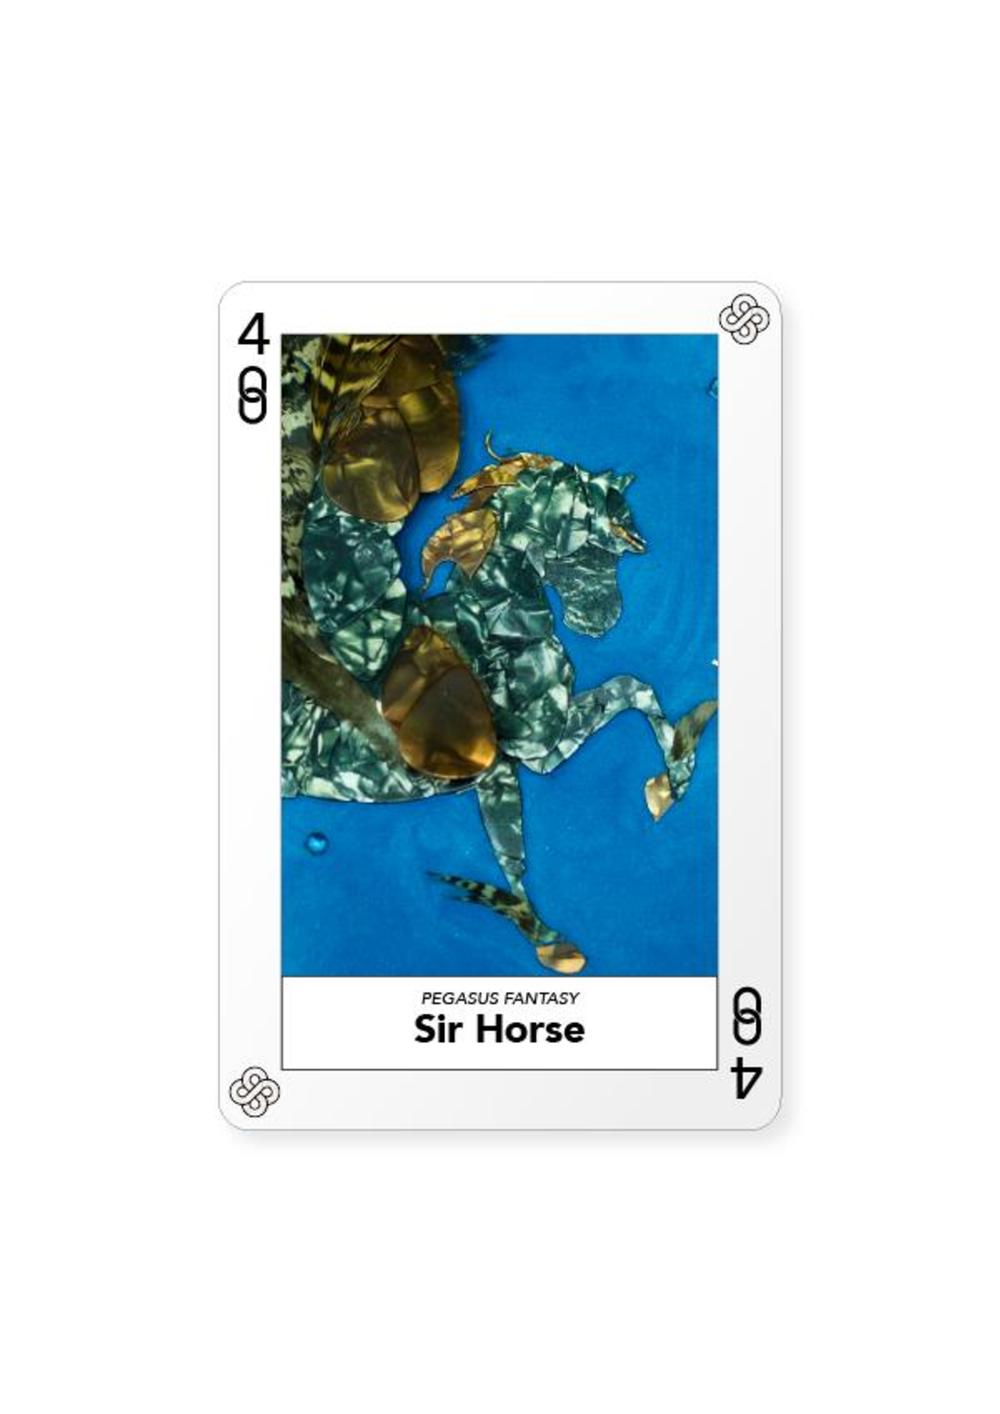 Certificate of Authenticity and Consignment - Sir Horse